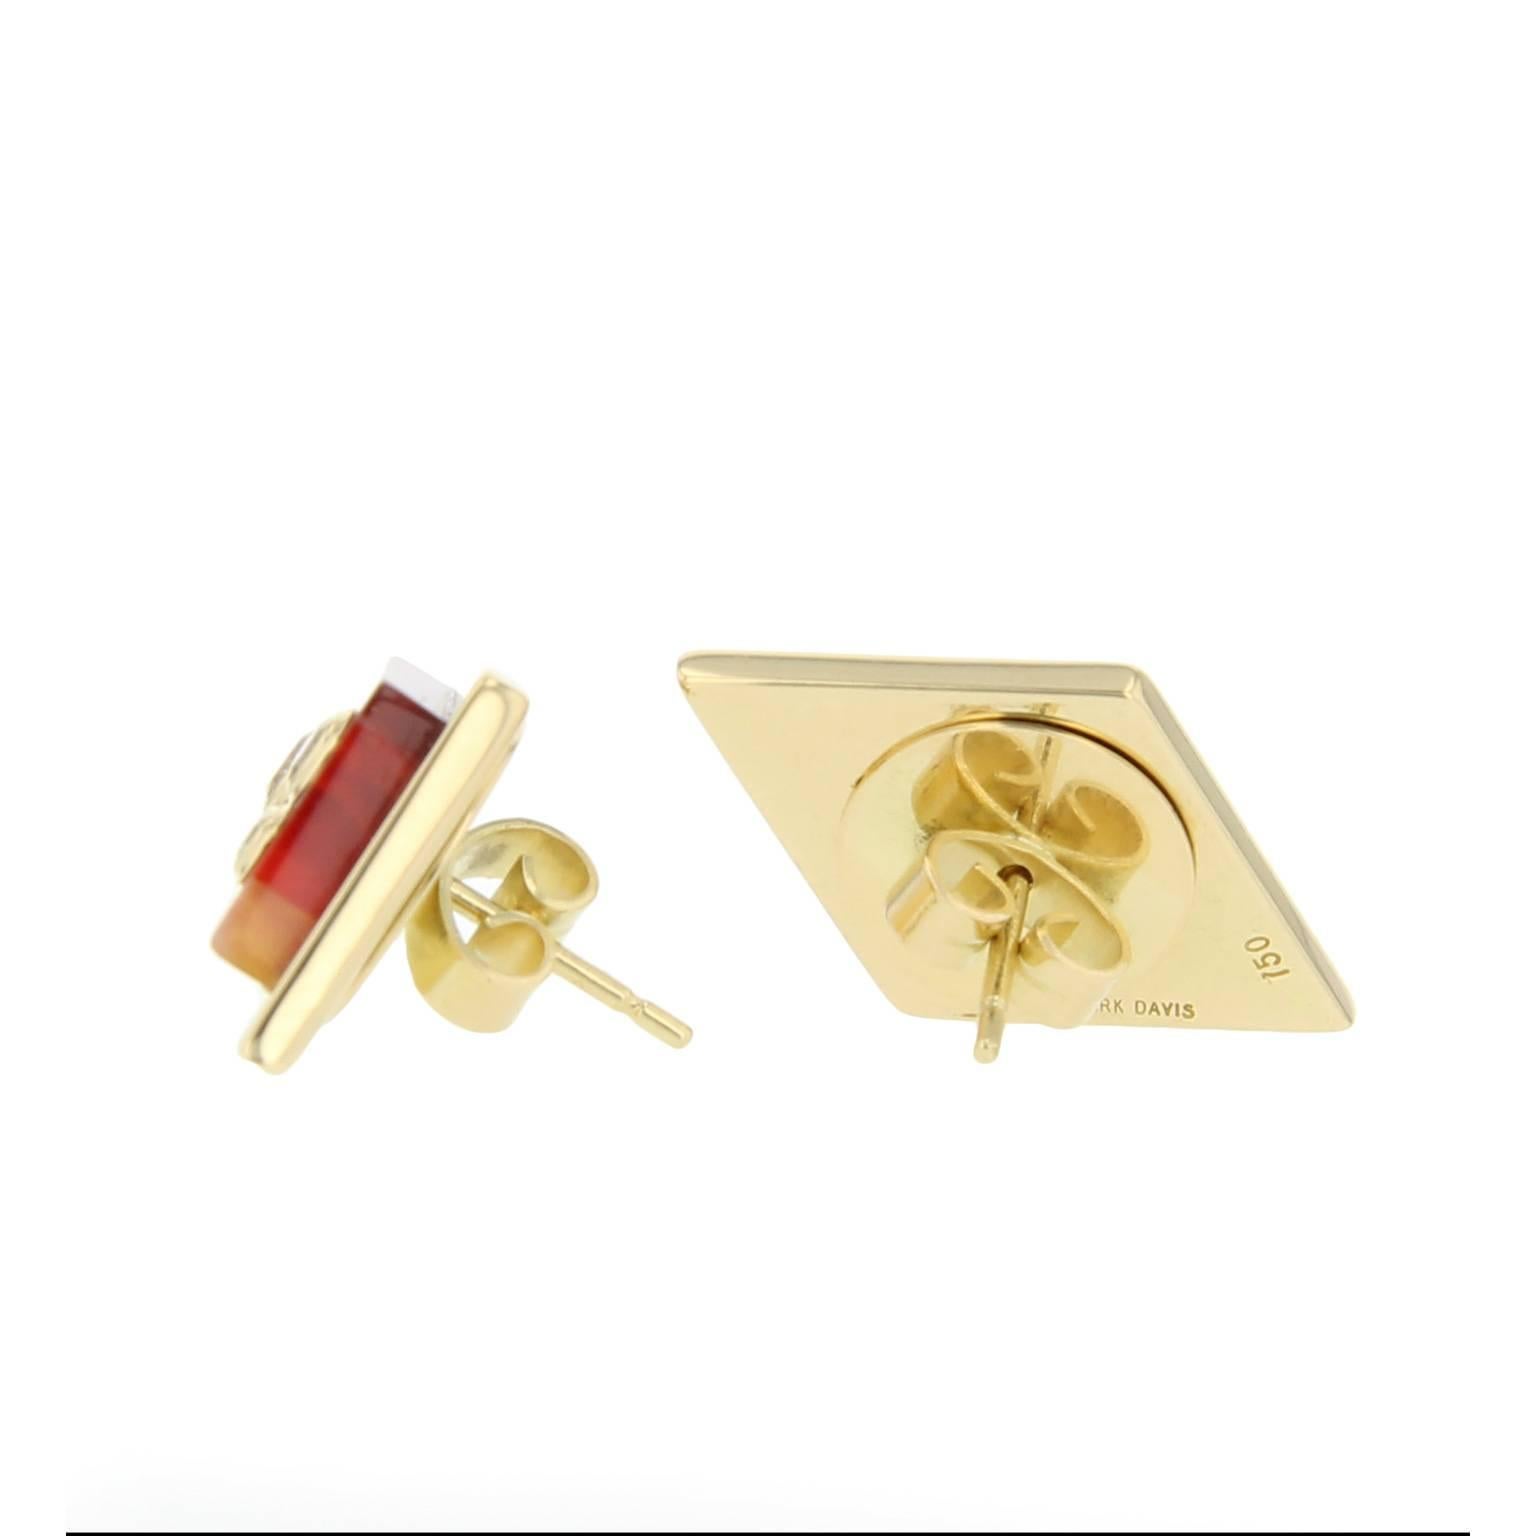 These kite-shaped stud earrings are created using laminated strips of pink and burgundy bakelite mounted in polished 18k yellow gold frames. They are adorned with fine diamonds set in 18k yellow gold bezels.

Full details below: 
• From the Mark